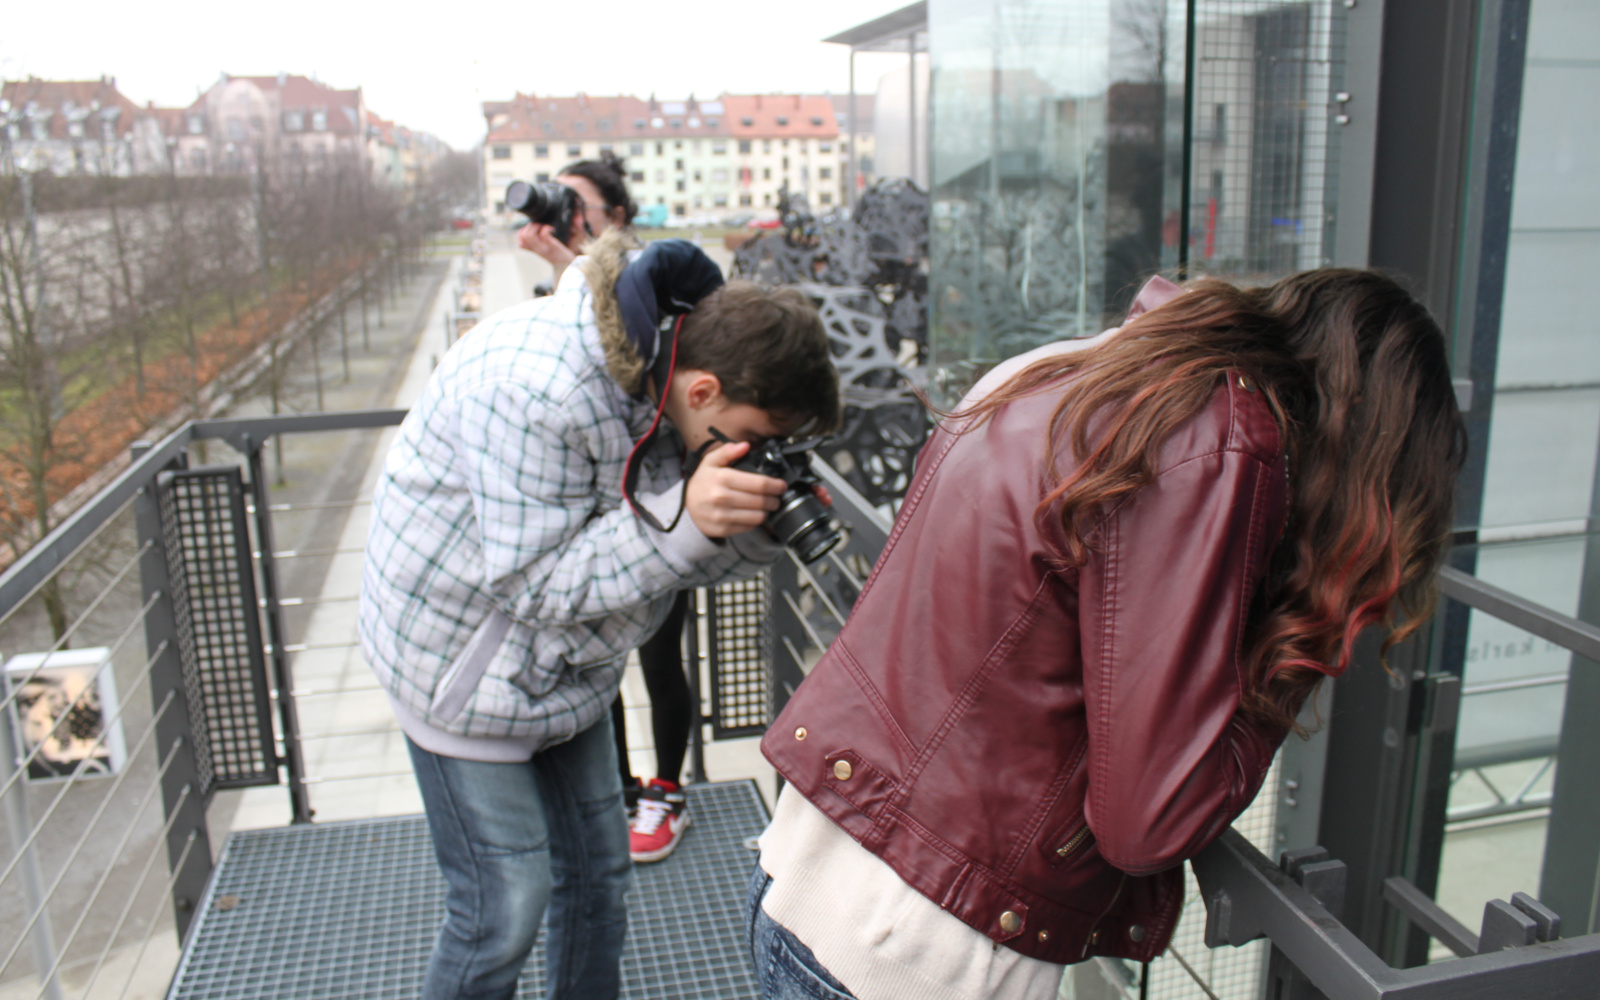 Three youngsters are taking photos on the stairs in front of the ZKM in different directions.